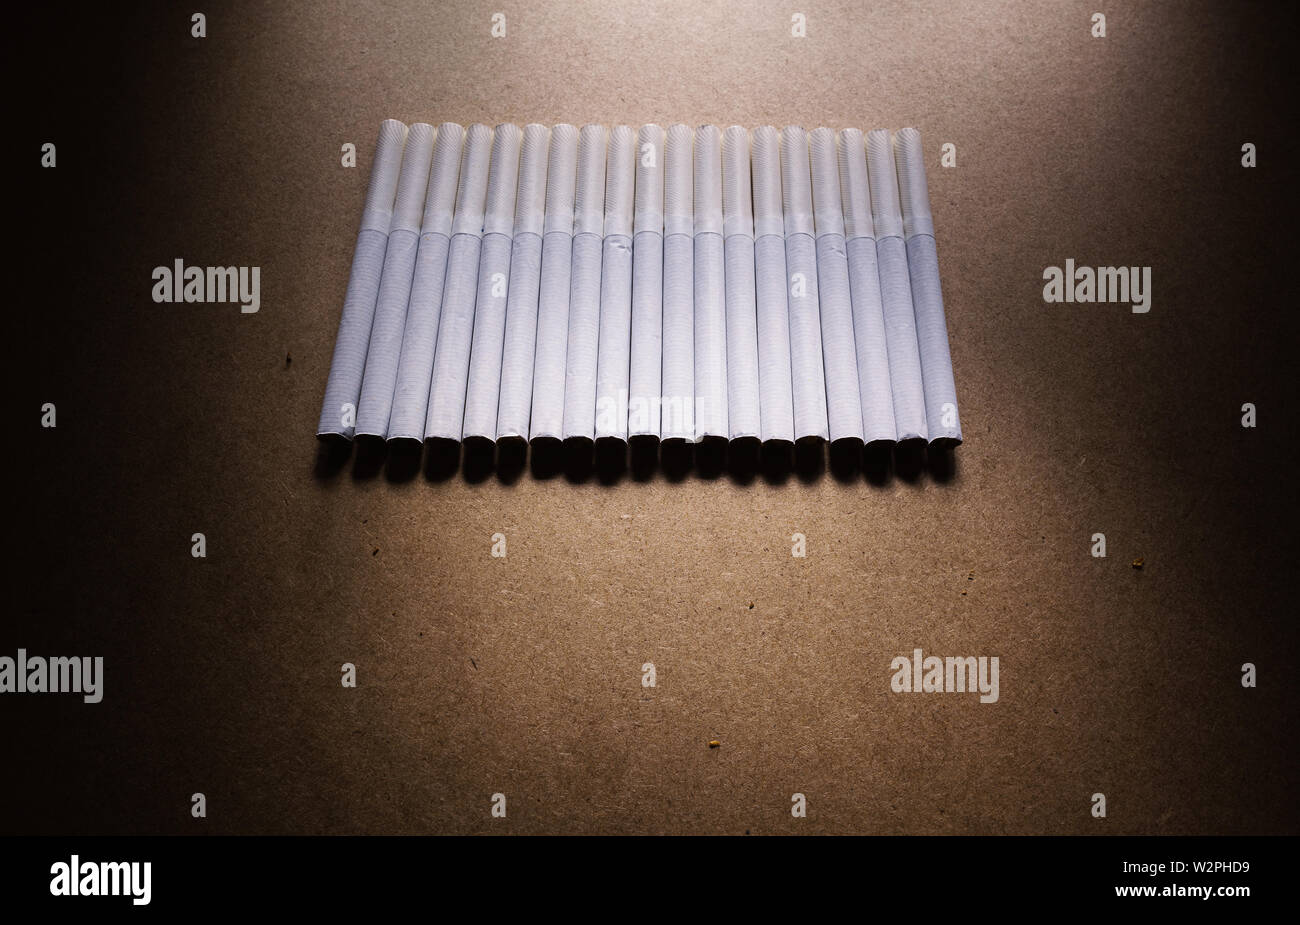 Abstract composition of bunch of cigarettes on brown surface. Stock Photo